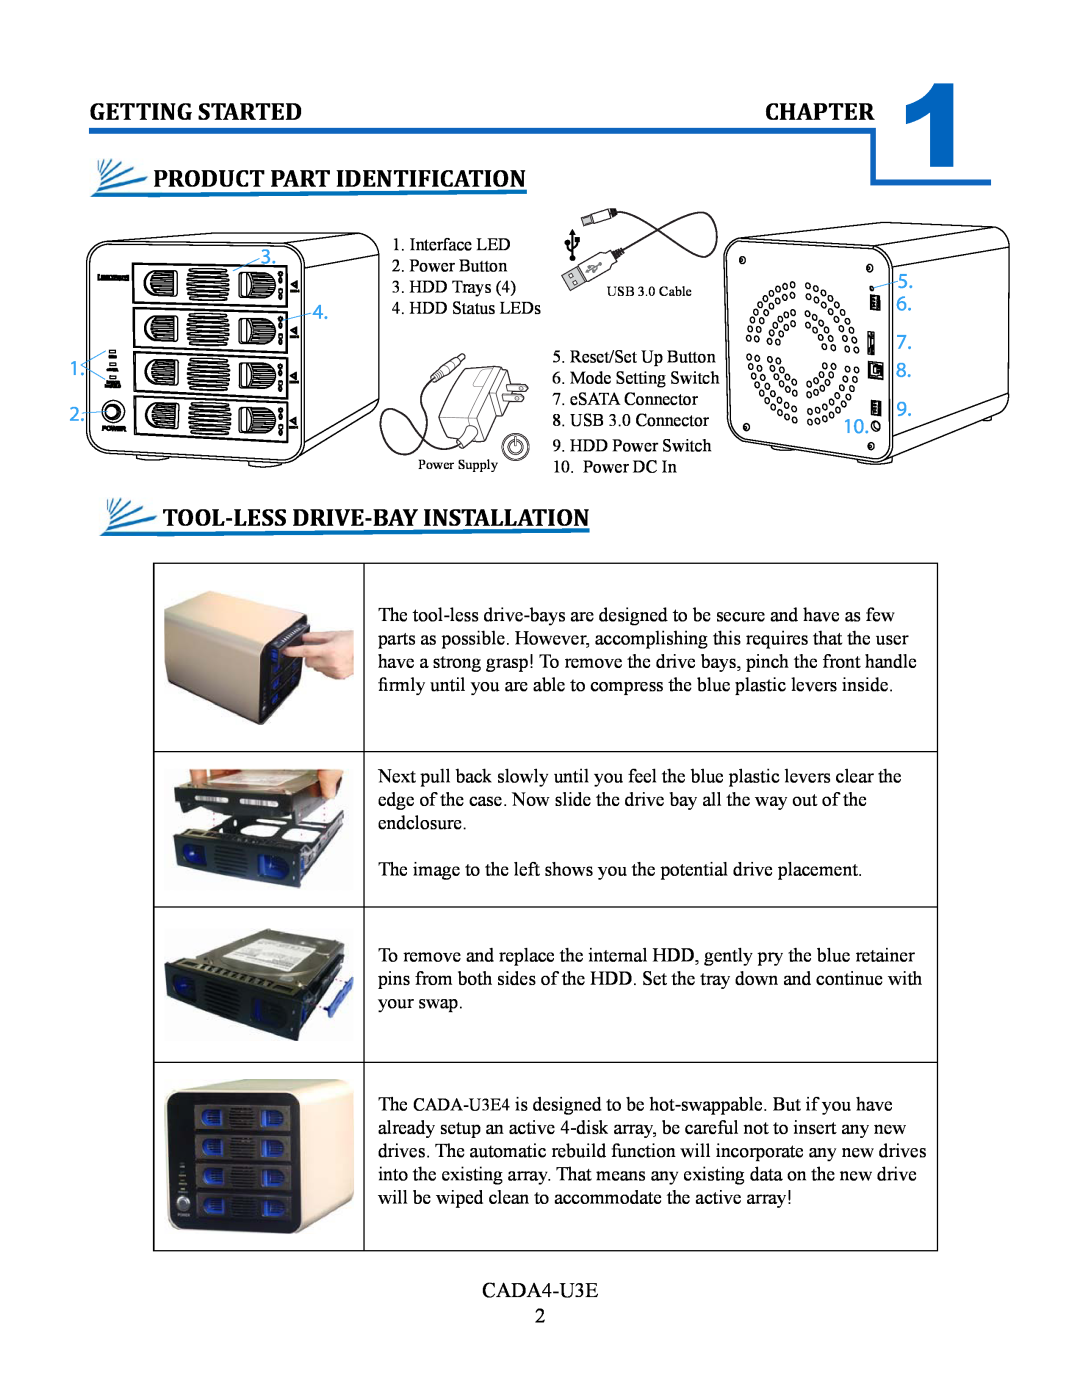 Cavalry Storage CADA-U3E4 Product Part Identification, Tool-Less Drive-Bay Installation, Getting Started, Chapter 